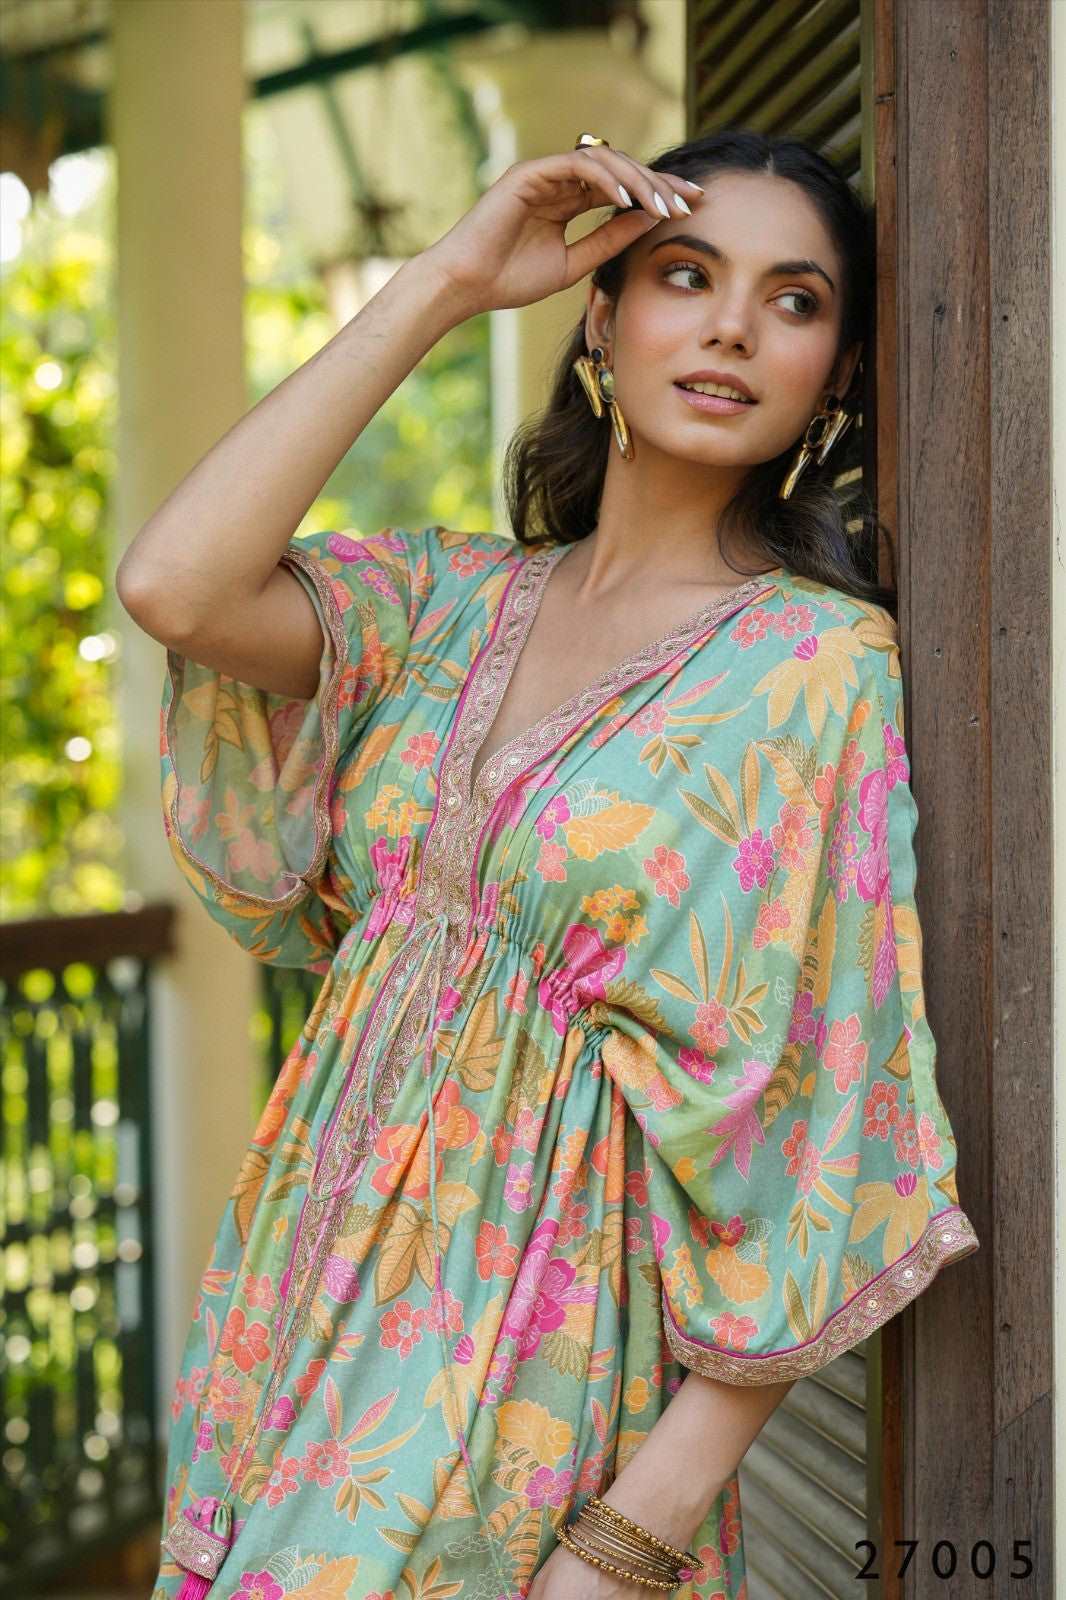 The model in the image is wearing Floral Print Kaftan Tunic with Palazzo from Alice Milan. Crafted with the finest materials and impeccable attention to detail, the  looks premium, trendy, luxurious and offers unparalleled comfort. It’s a perfect clothing option for loungewear, resort wear, party wear or for an airport look. The woman in the image looks happy, and confident with her style statement putting a happy smile on her face.